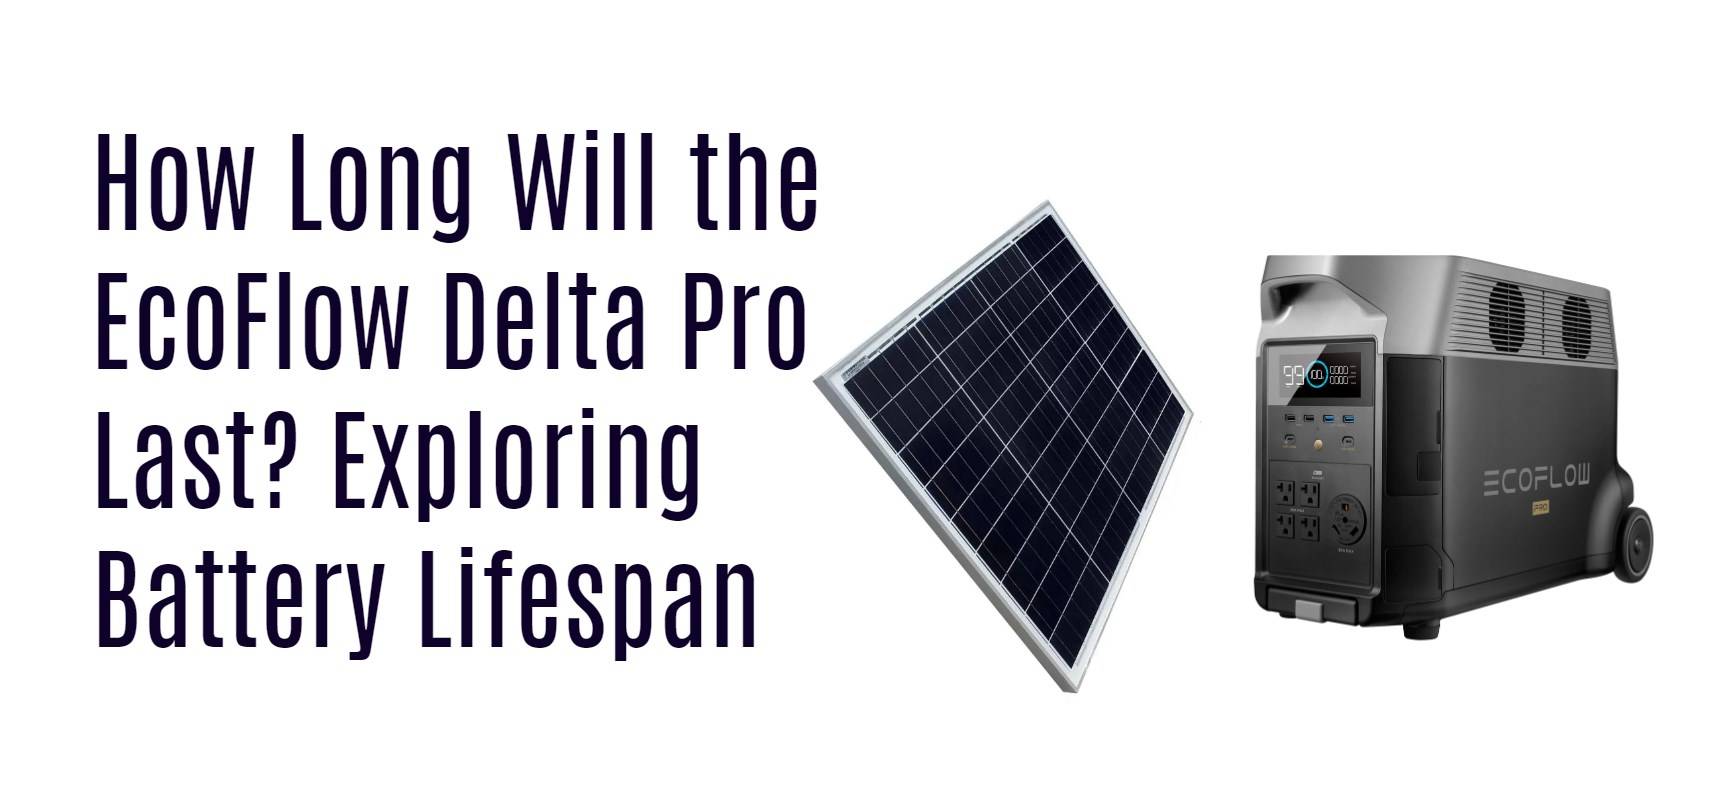 How Long Will the EcoFlow Delta Pro Last? Exploring Battery Lifespan